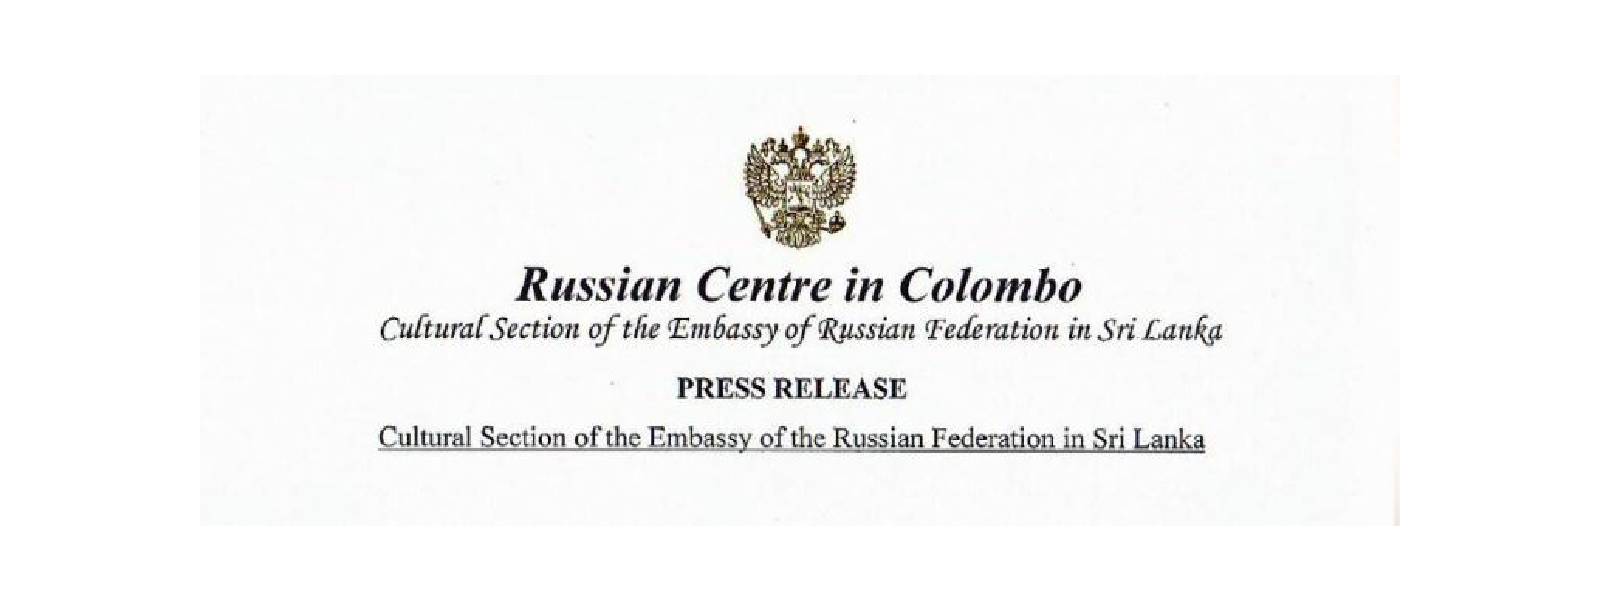 Russia expresses concern on delisting of three universities in Sri Lanka